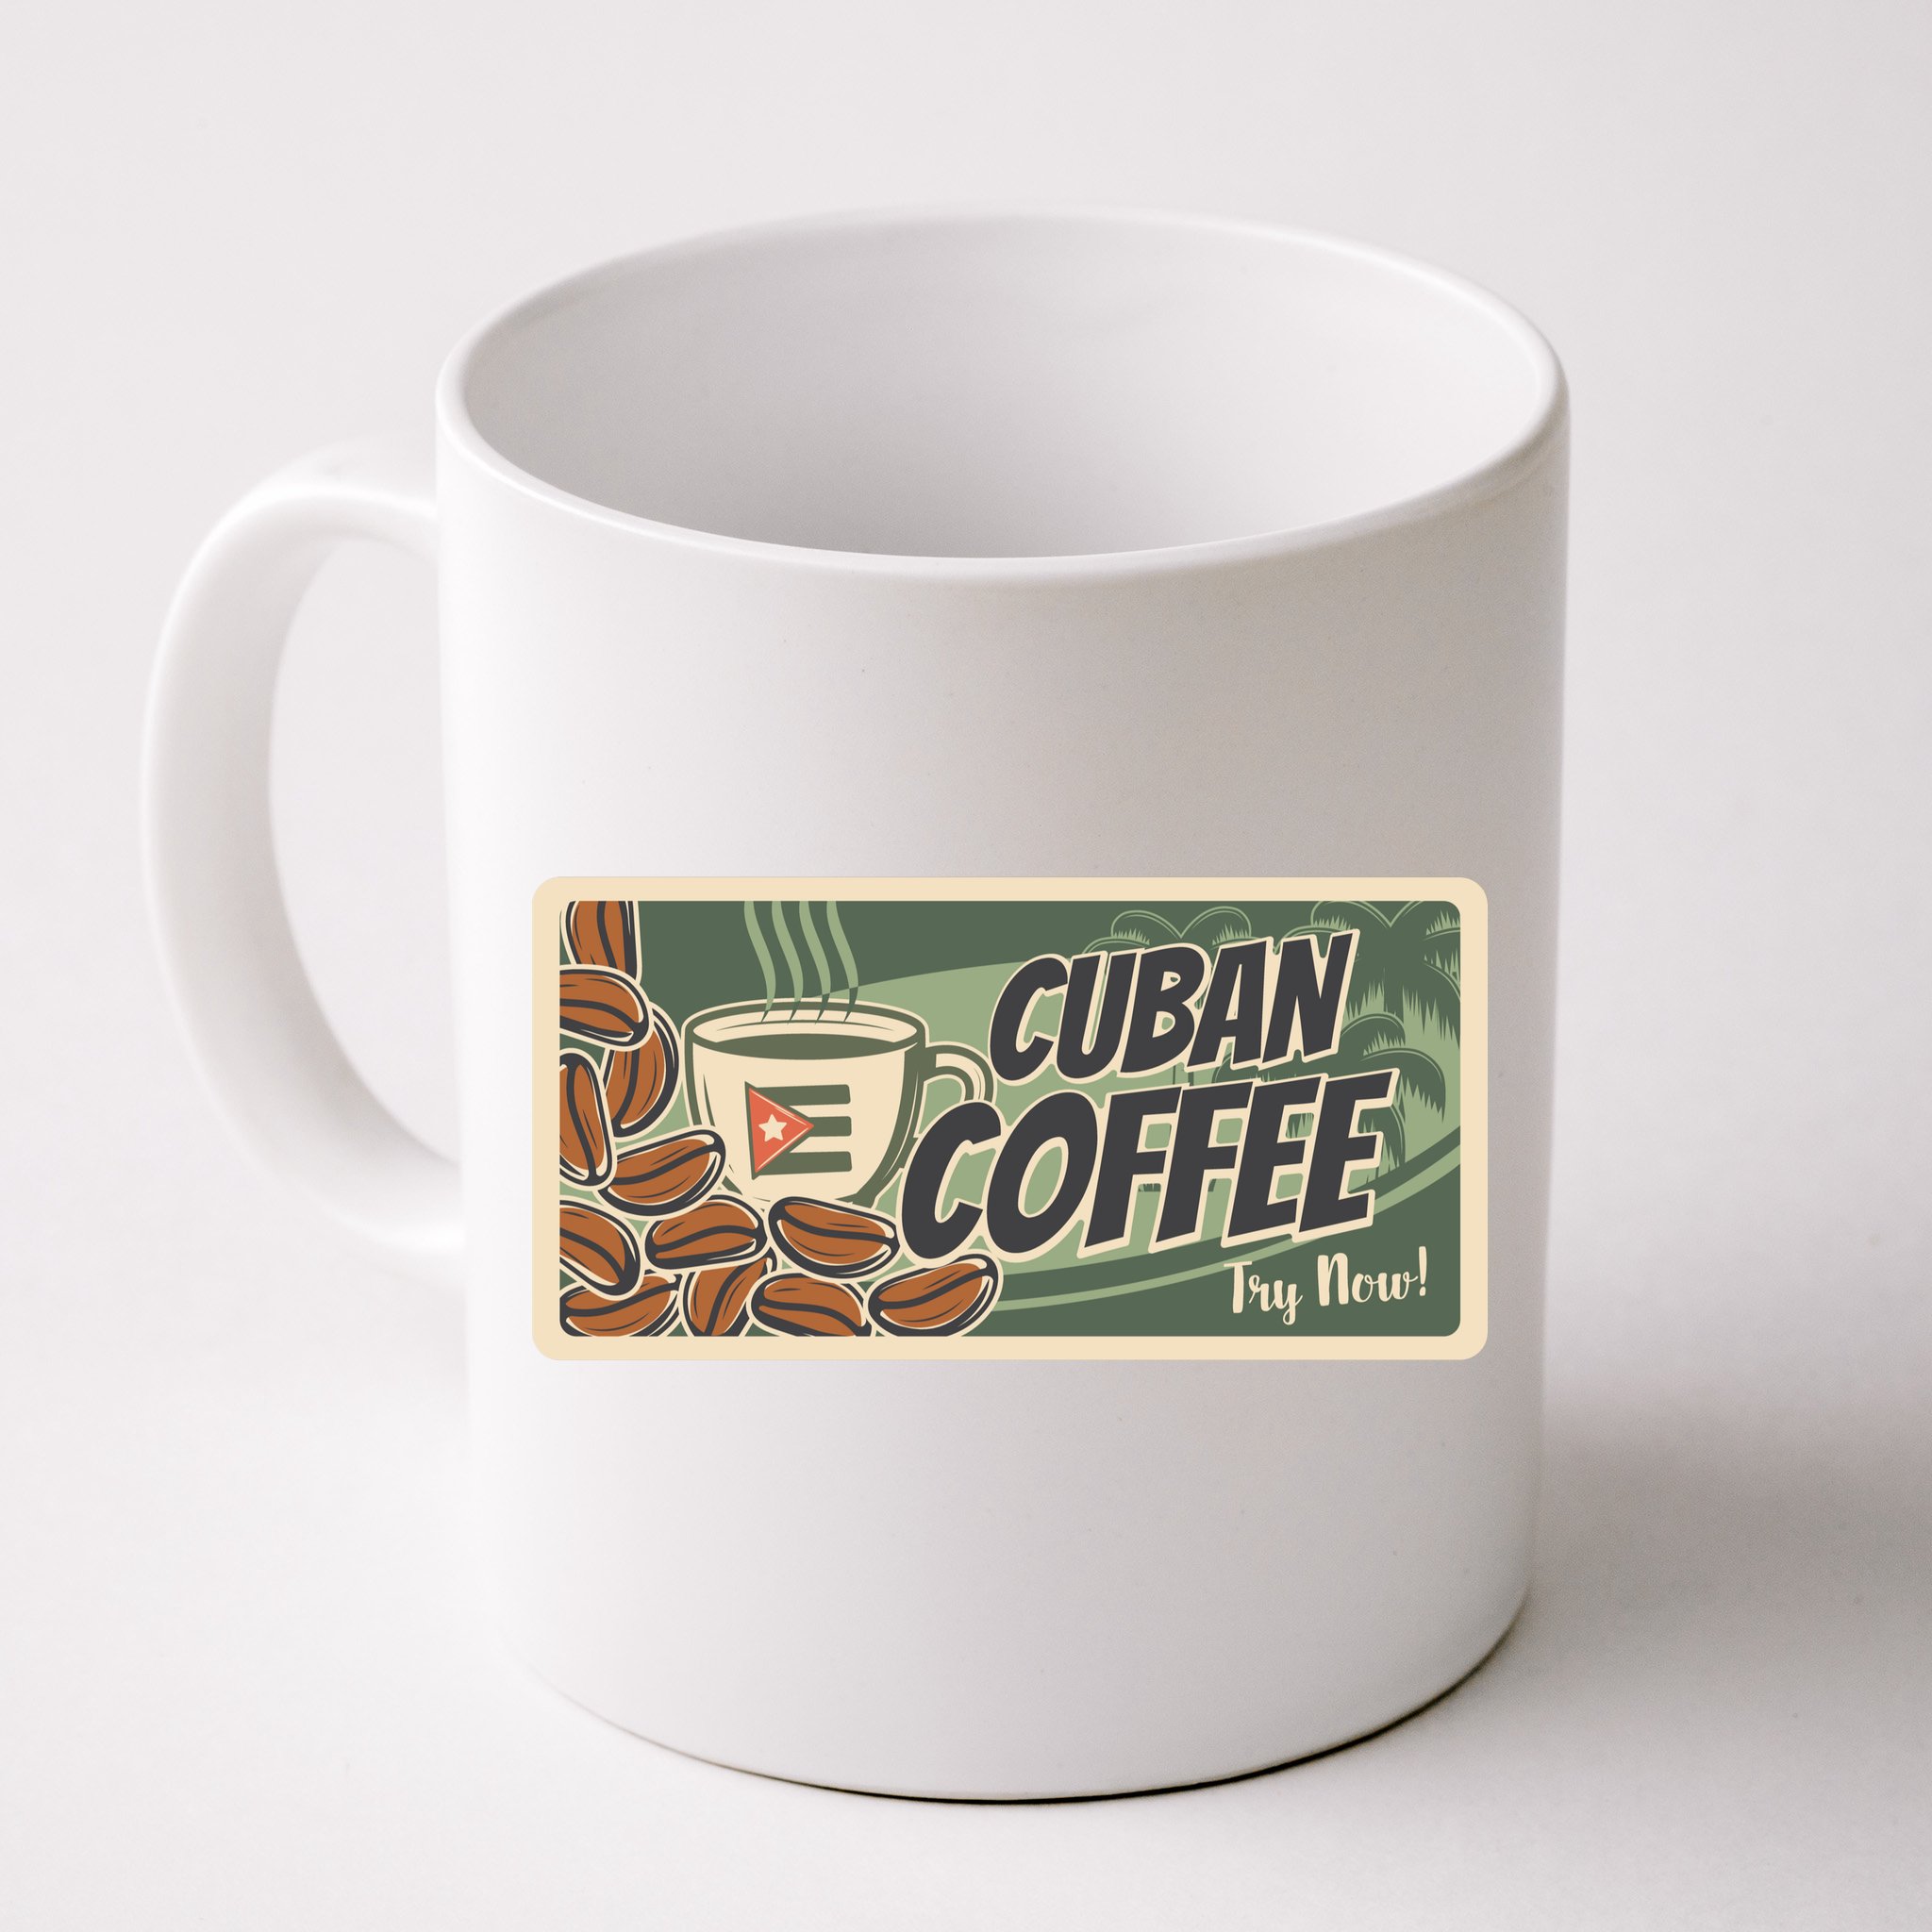 https://images3.teeshirtpalace.com/images/productImages/cuba-travel-retro-banner-cuban-coffee--white-cfm-front.jpg